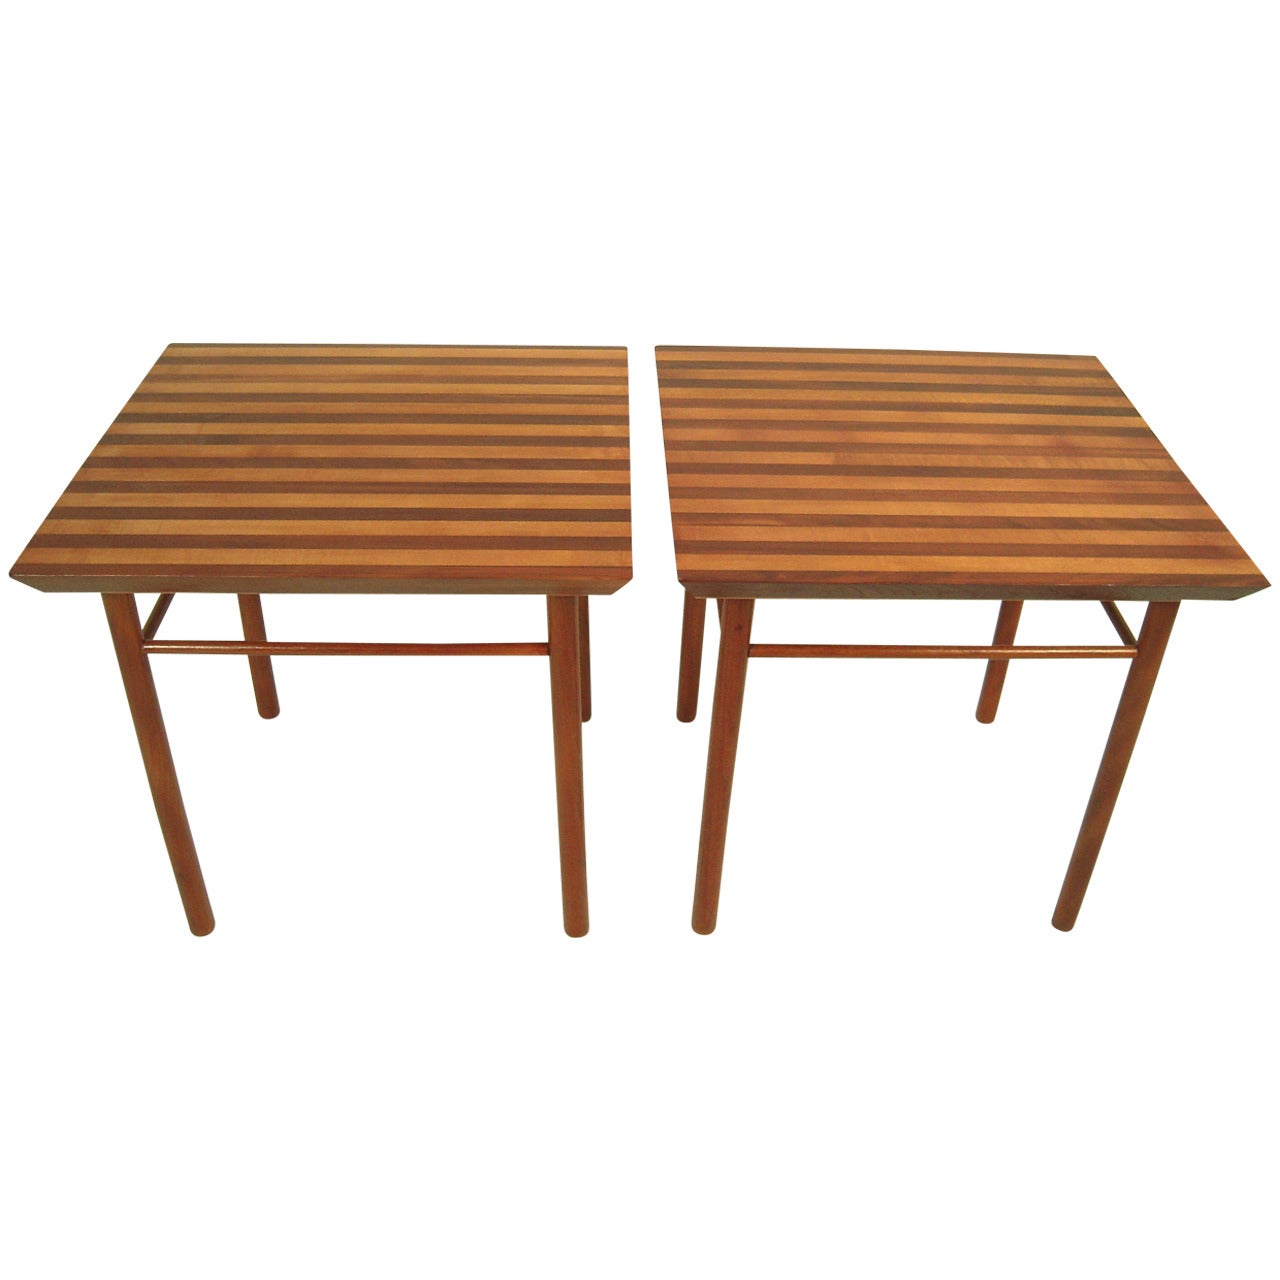 Pair of Graphic Striped Wood Occasional Tables